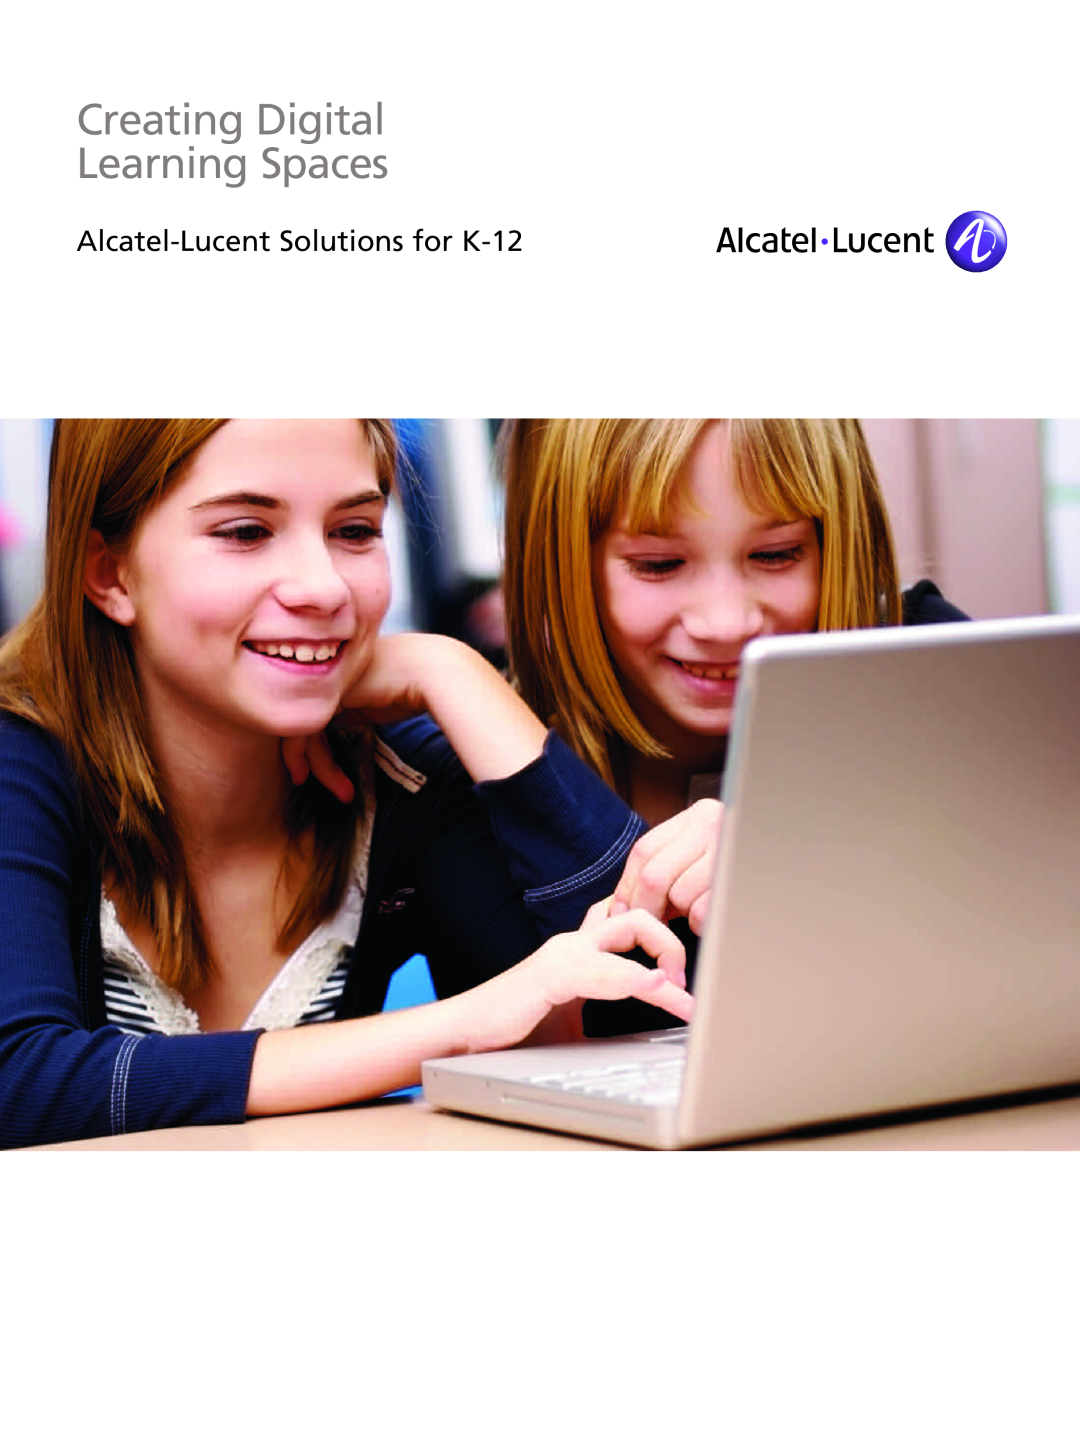 Alcatel Carrier Internetworking Solutions manual Alcatel-Lucent Solutions for K-12, Creating Digital Learning Spaces 